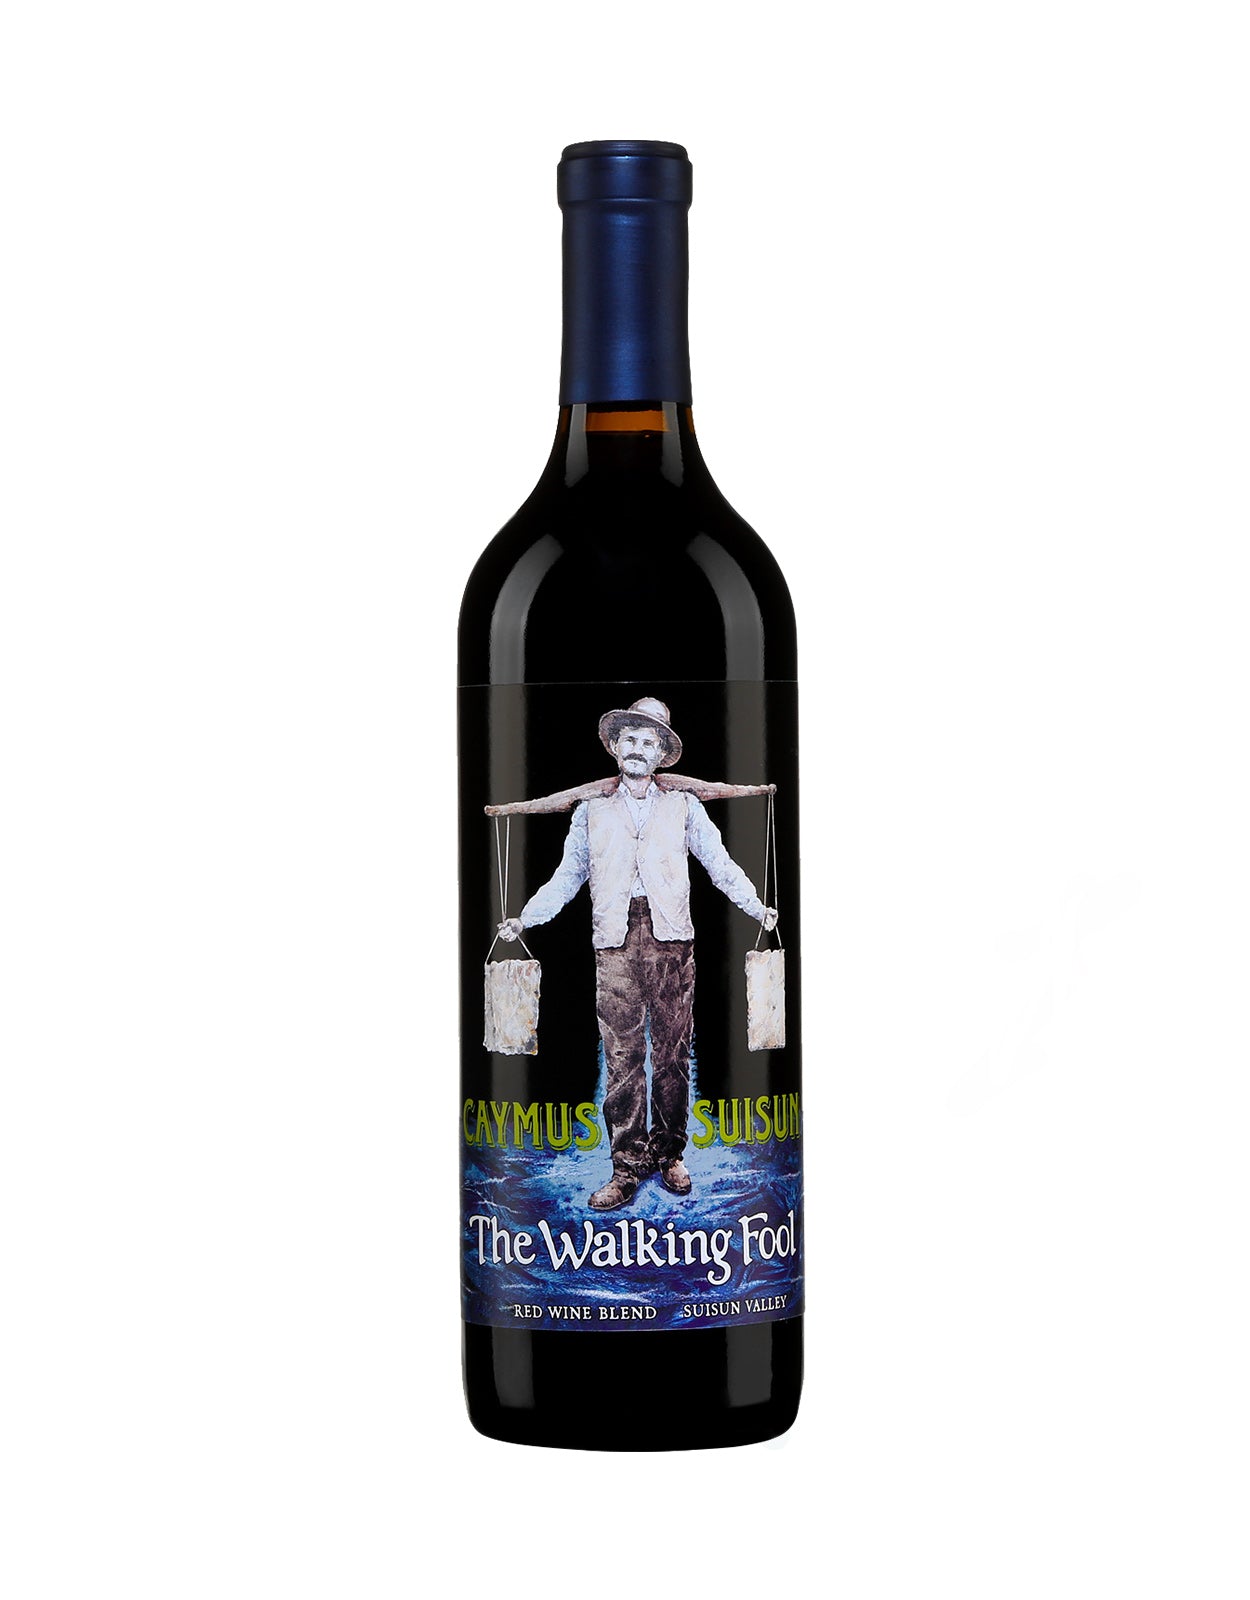 The Walking Fool 2021 By Caymus Vineyards